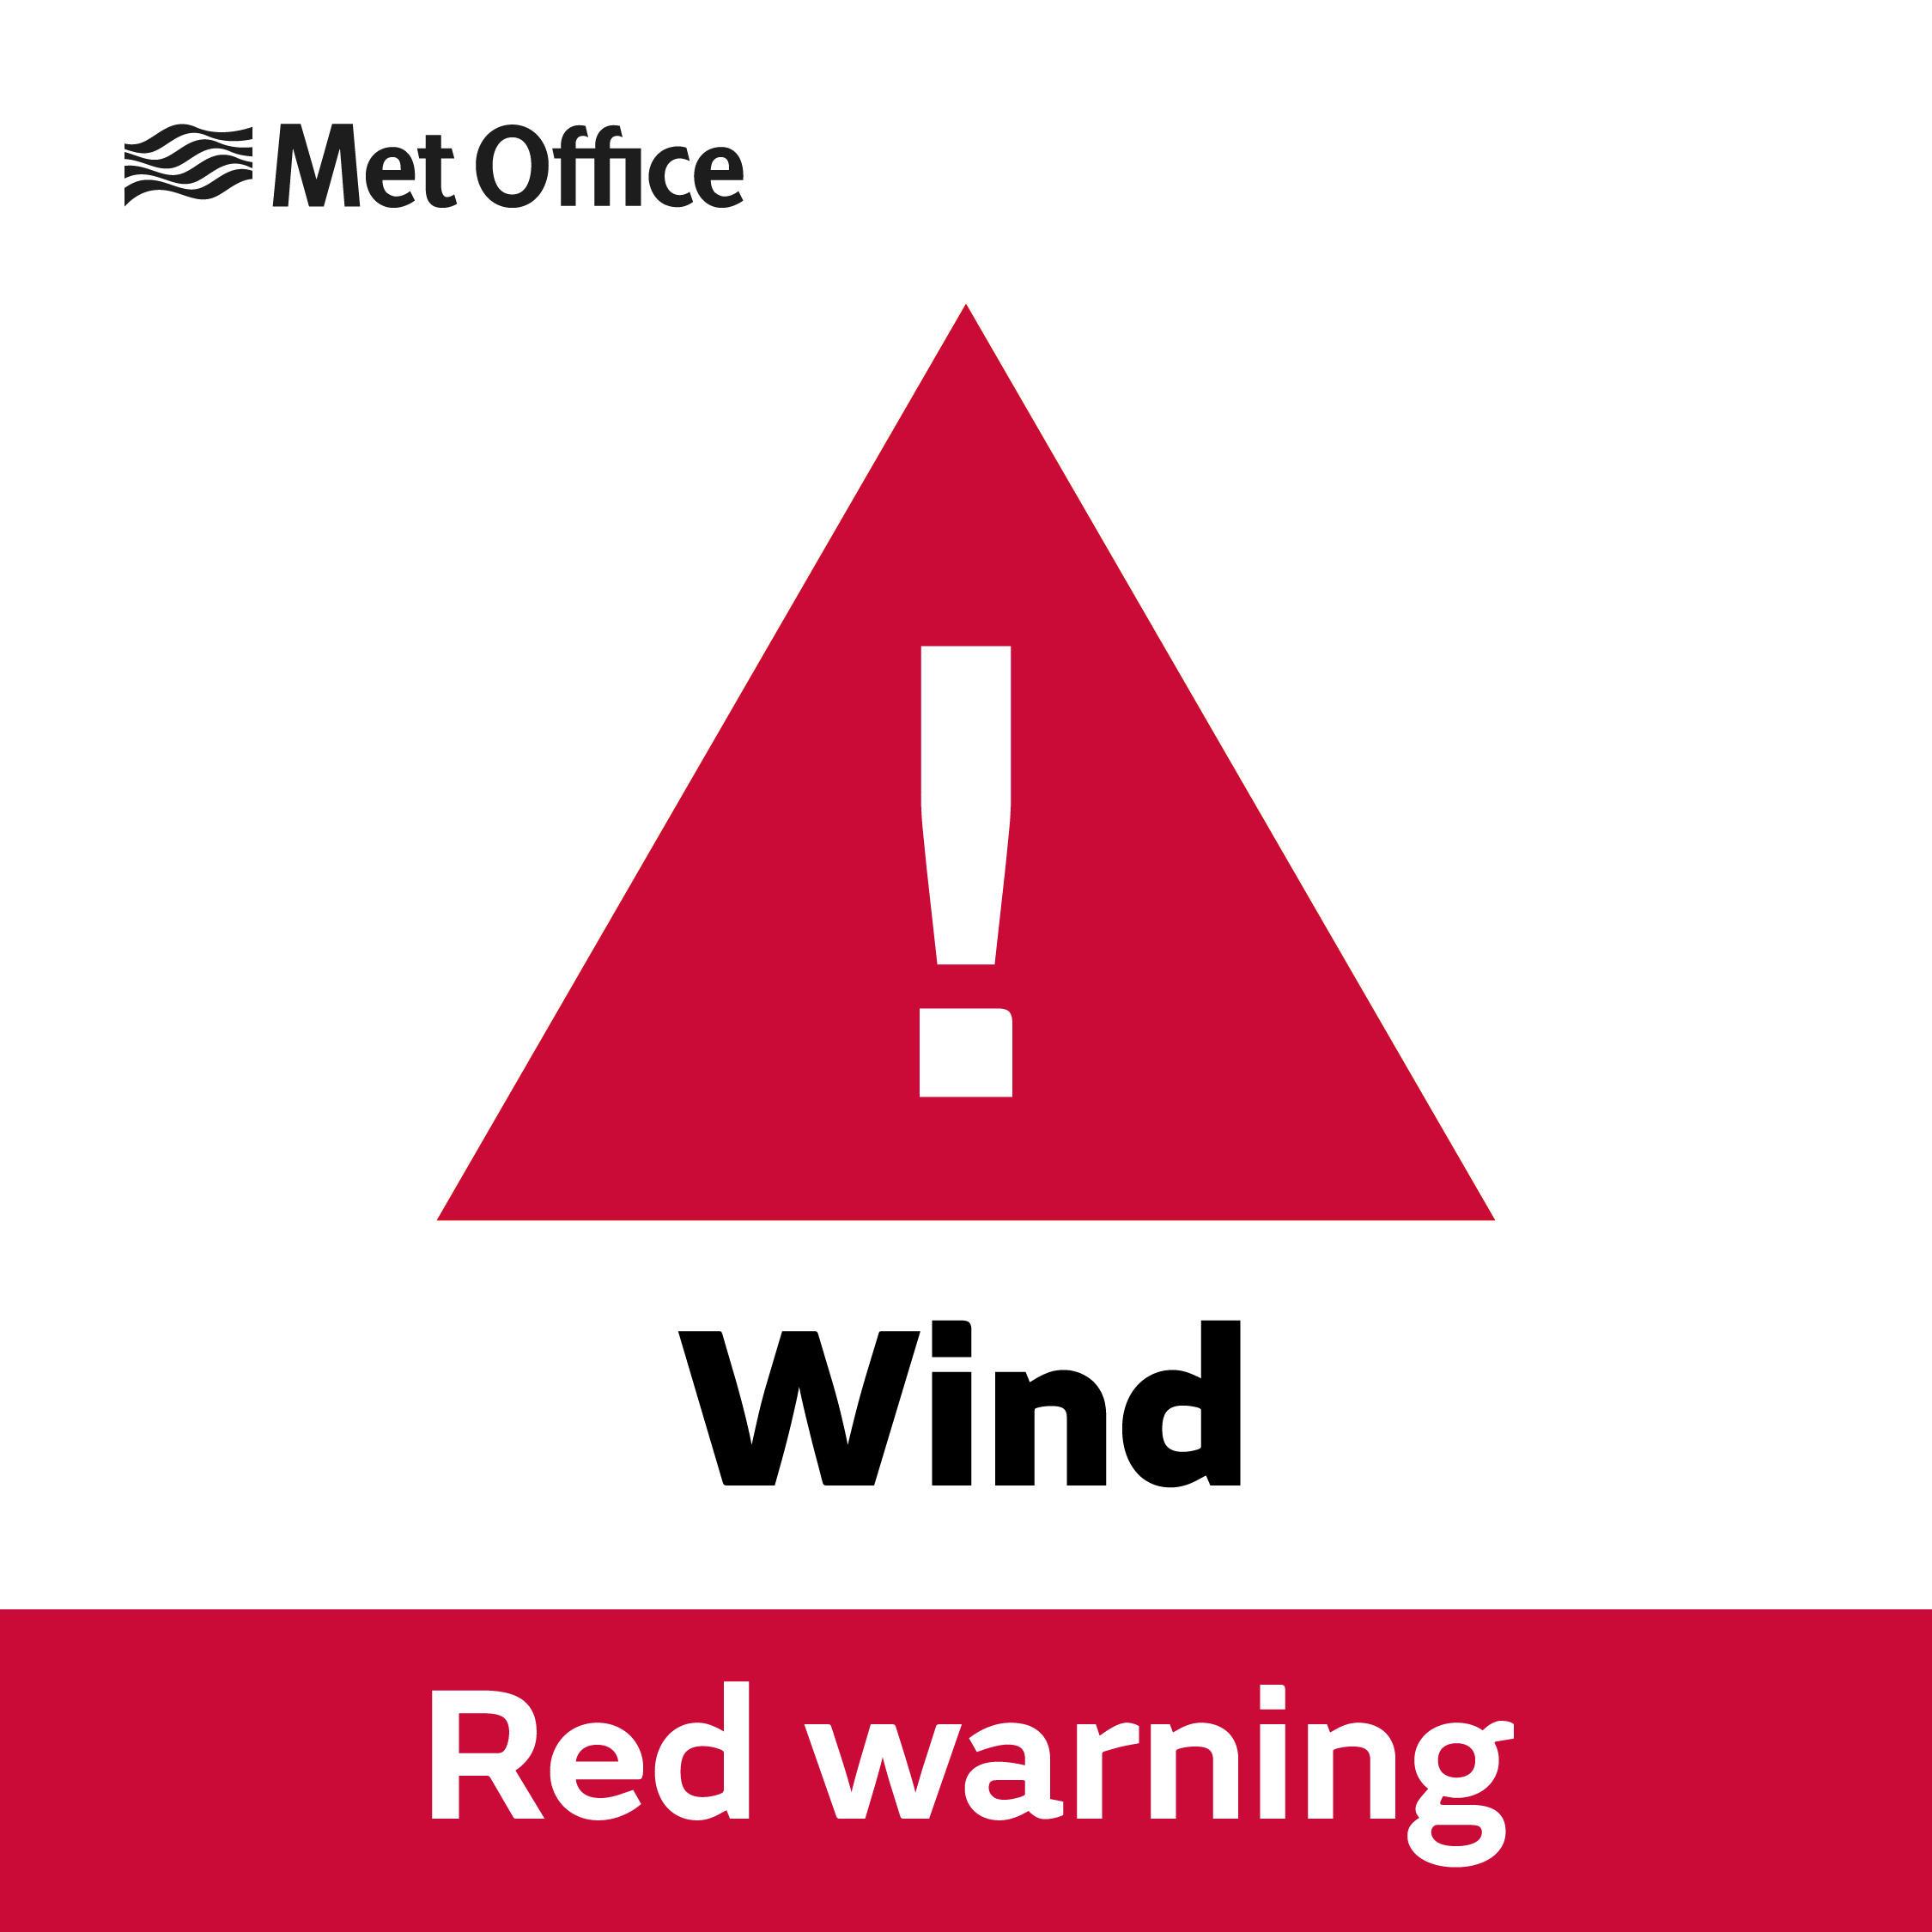 Amazon Jungle afbalanceret stabil Met Office - E England on Twitter: "Red warning of wind affecting East of  England https://t.co/XL9YcSjOtC https://t.co/MBL0IiyxTJ" / Twitter